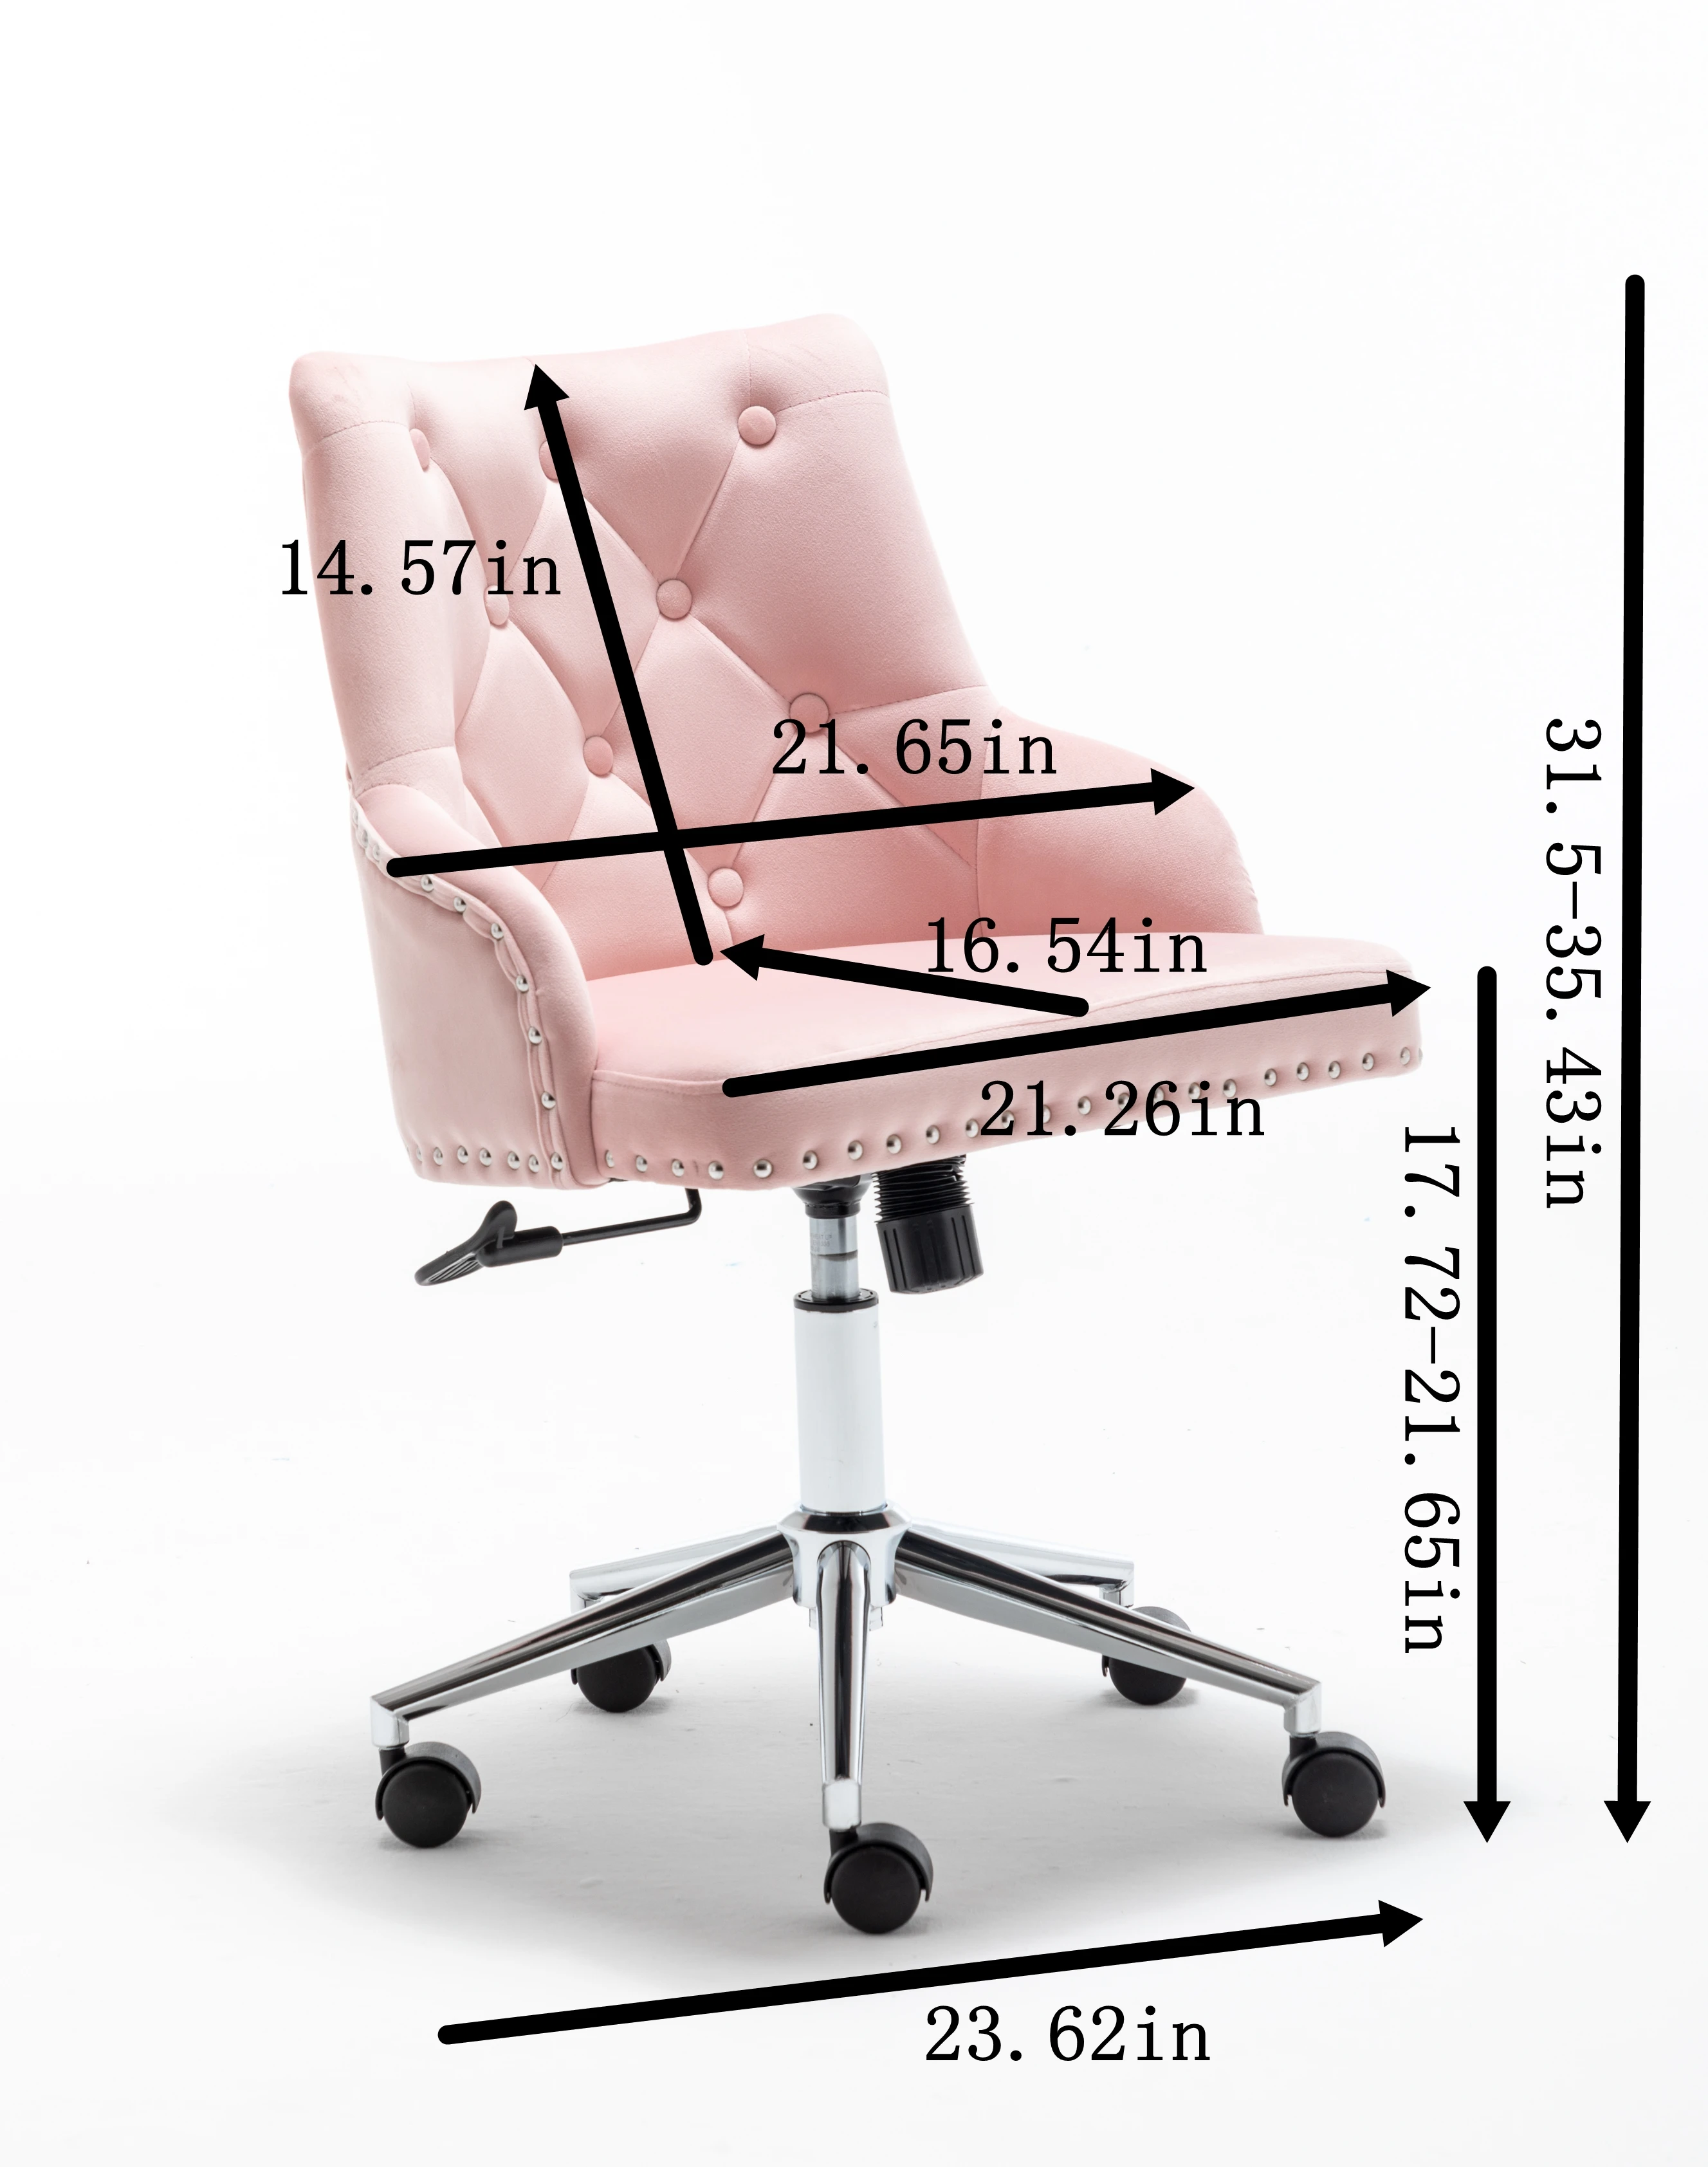 

High Back Swivel Office Chair Modern Design Velvet Desk Task Chair with Arms in Study Bedroom Grey/Pink[US-Stock]